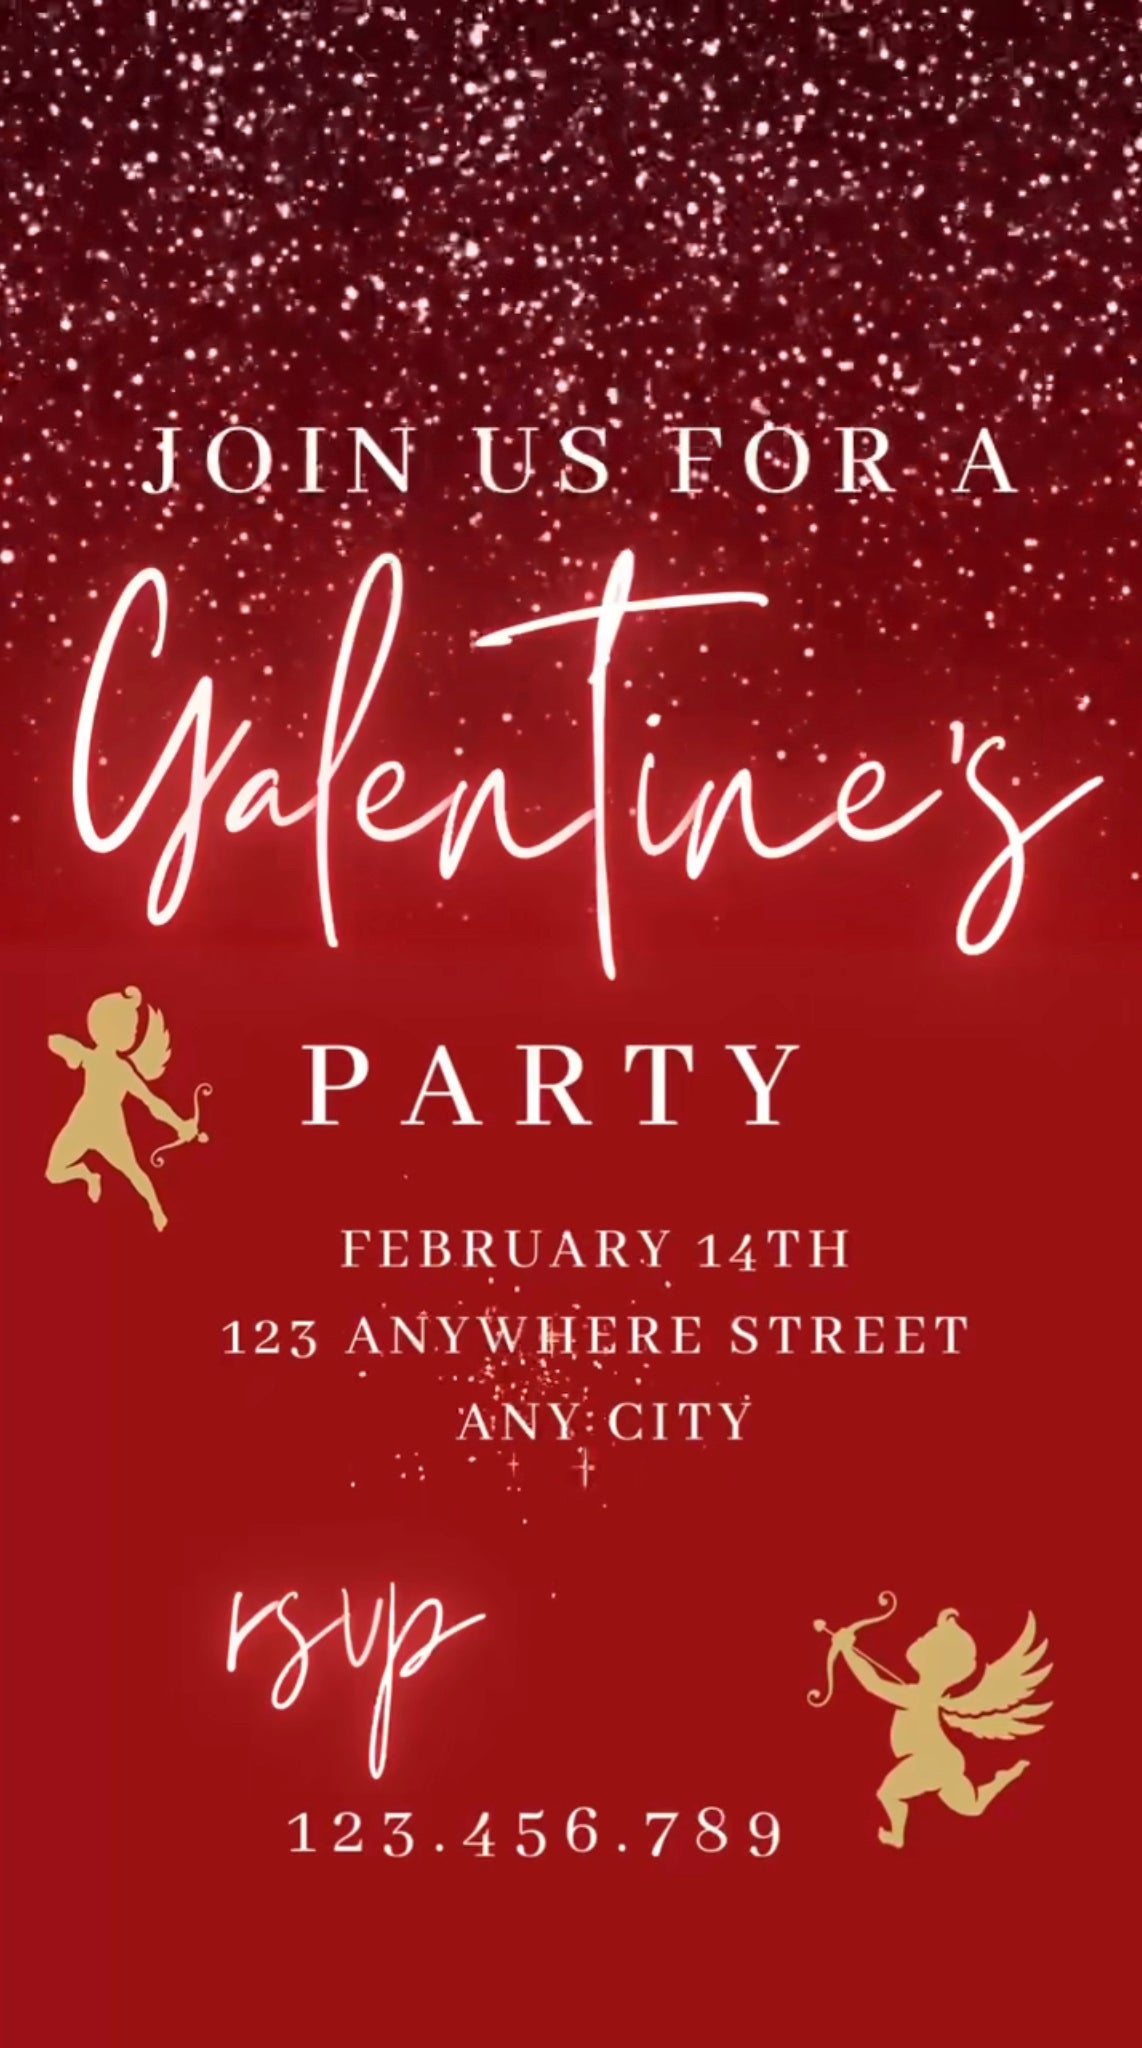 Valentine’s Day Invitation and Itinerary, Galentines Party Invite